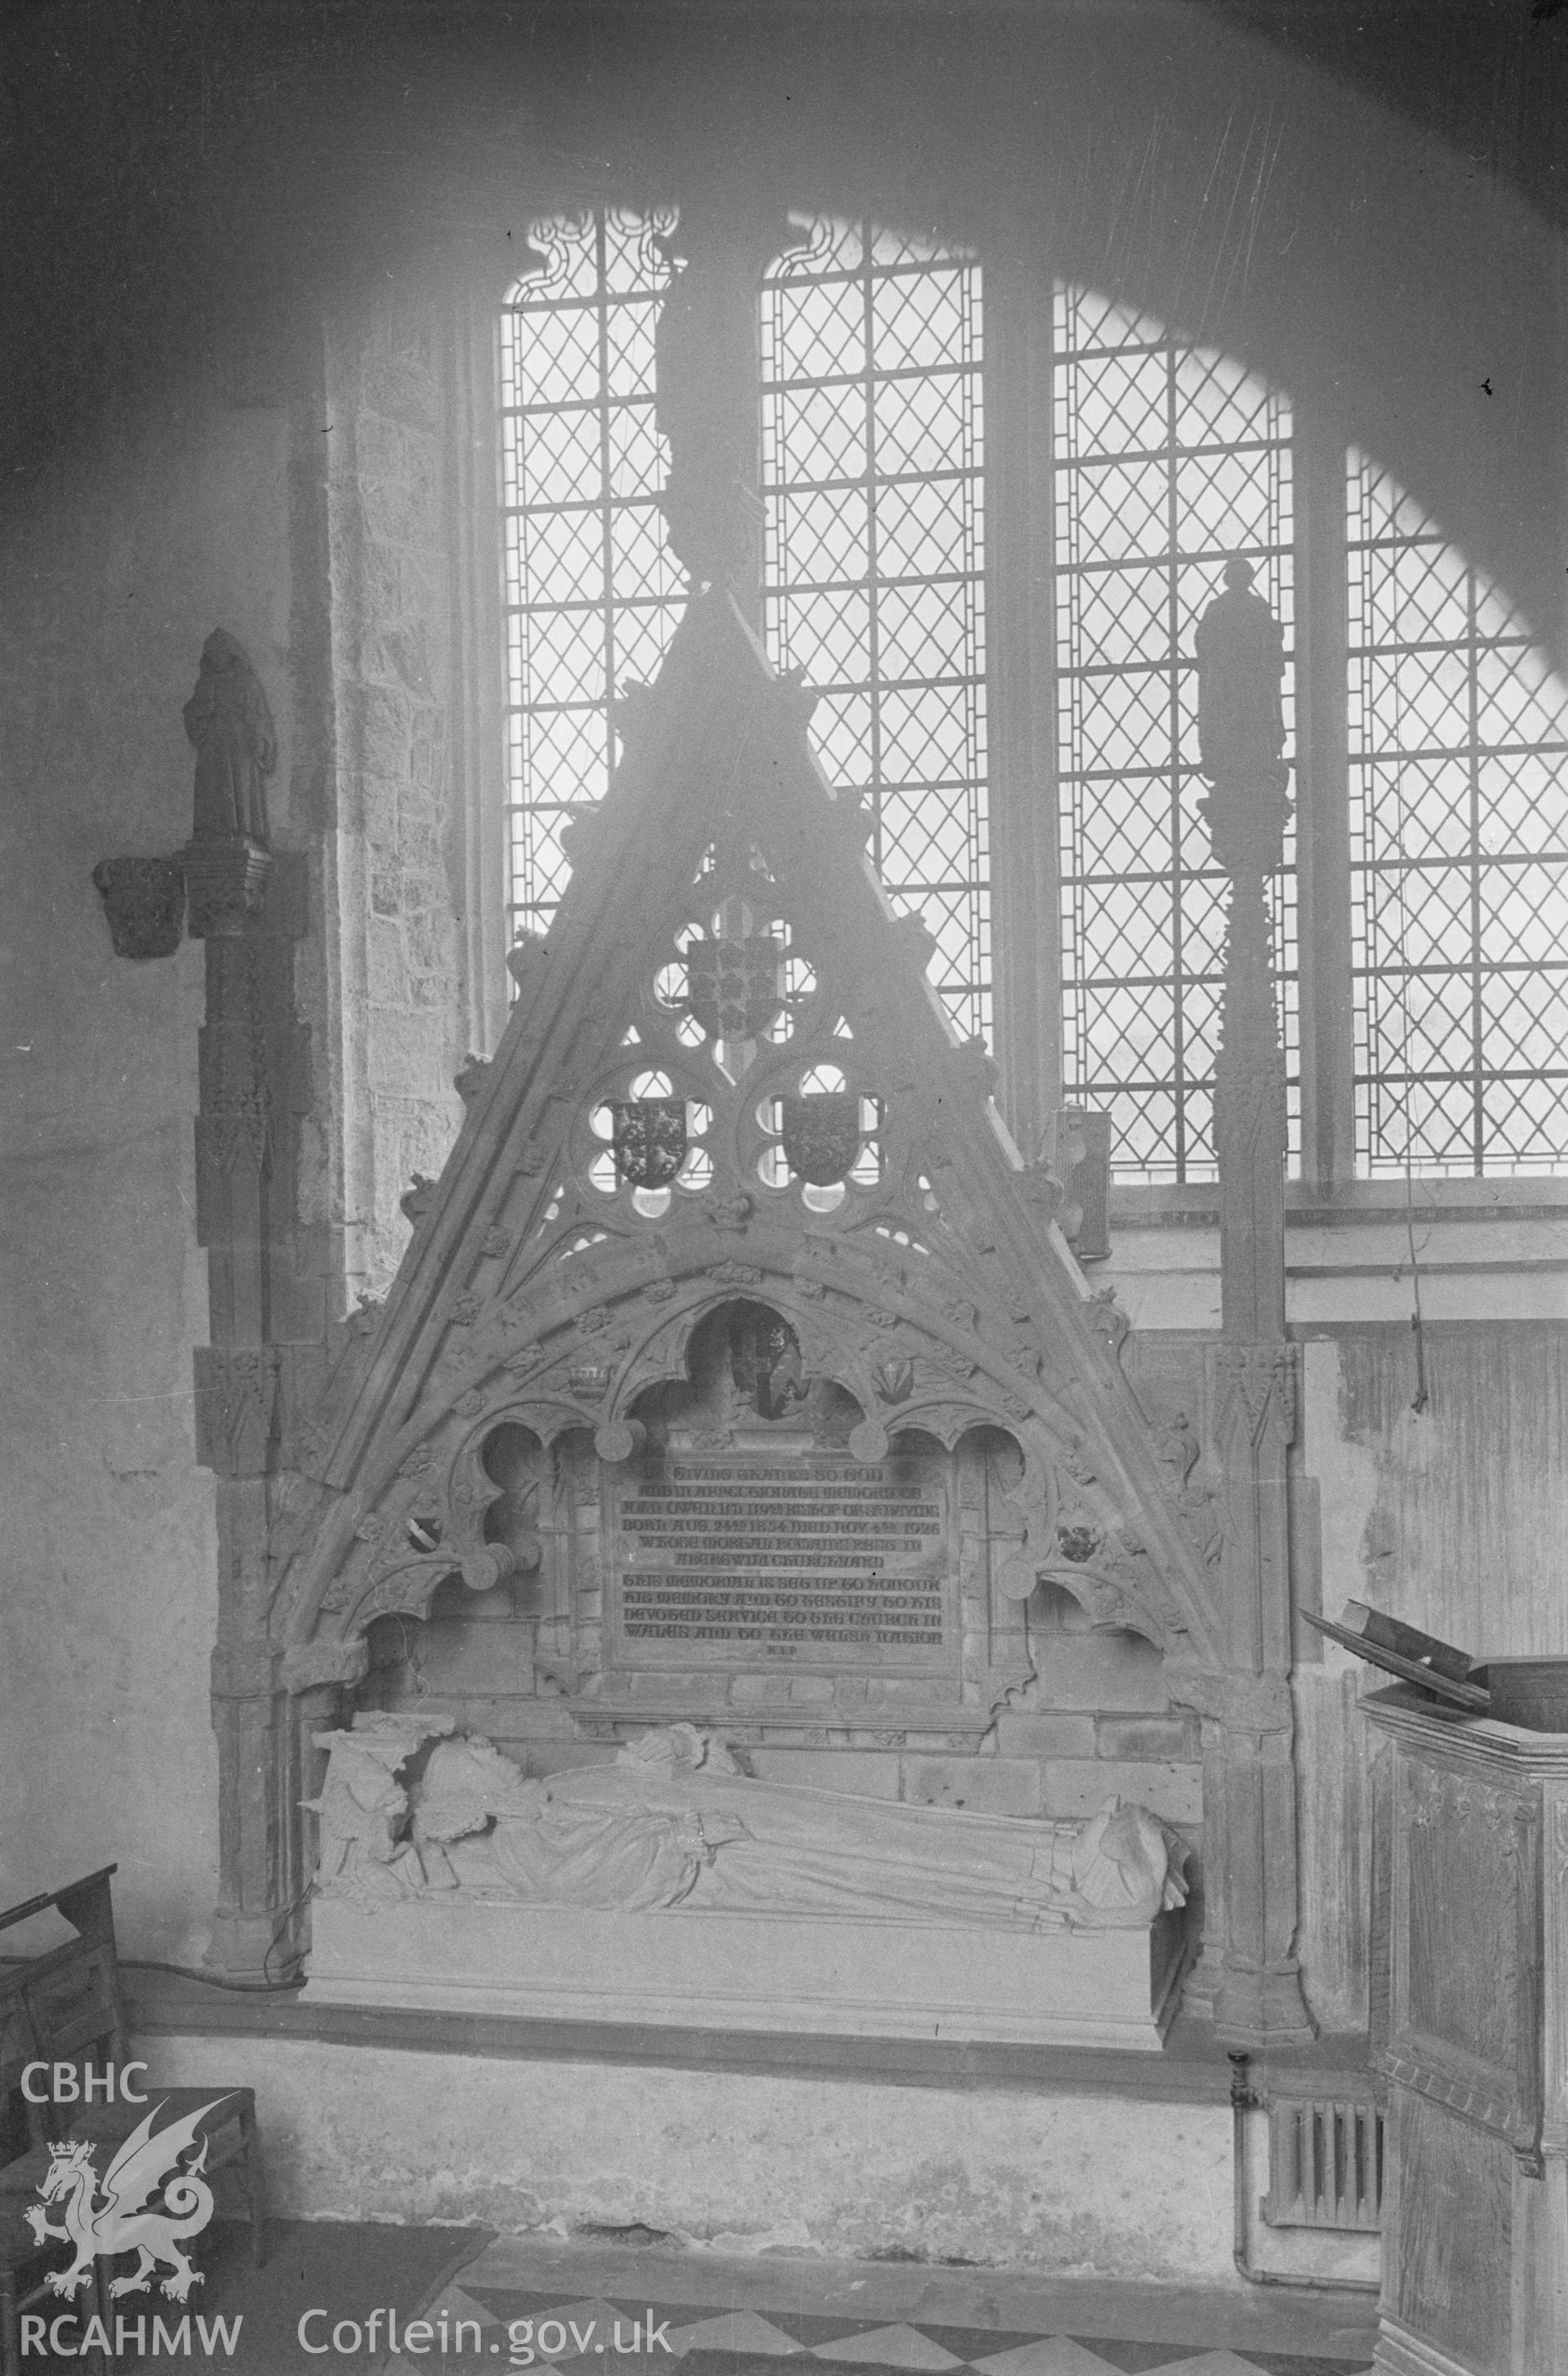 Black and white nitrate negative showing the tomb of B.P. Owen at St David's Cathedral.